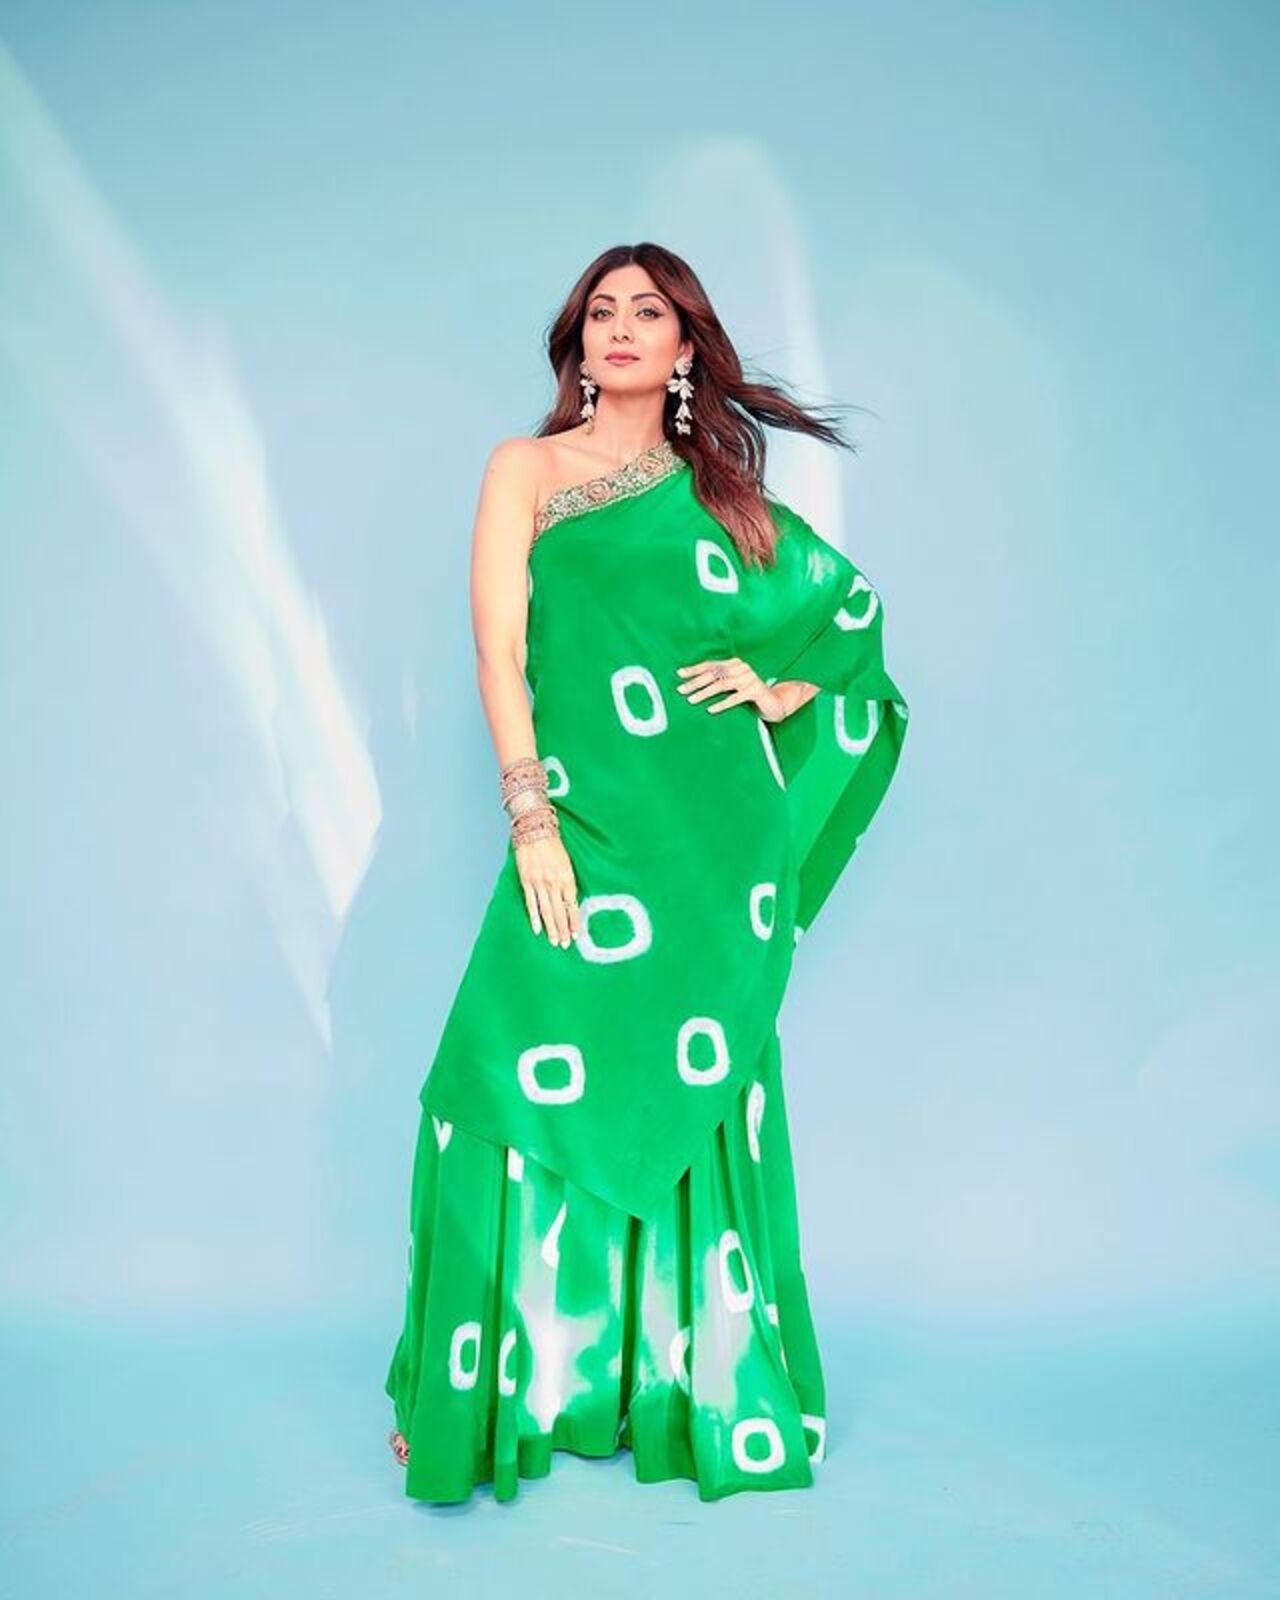 Shilpa Shetty looked gorgeous in her green fusion-style ethnic wear. She wore an off-shoulder blouse that trailed upto her waist and a sharara patterened with a loose bandhni print